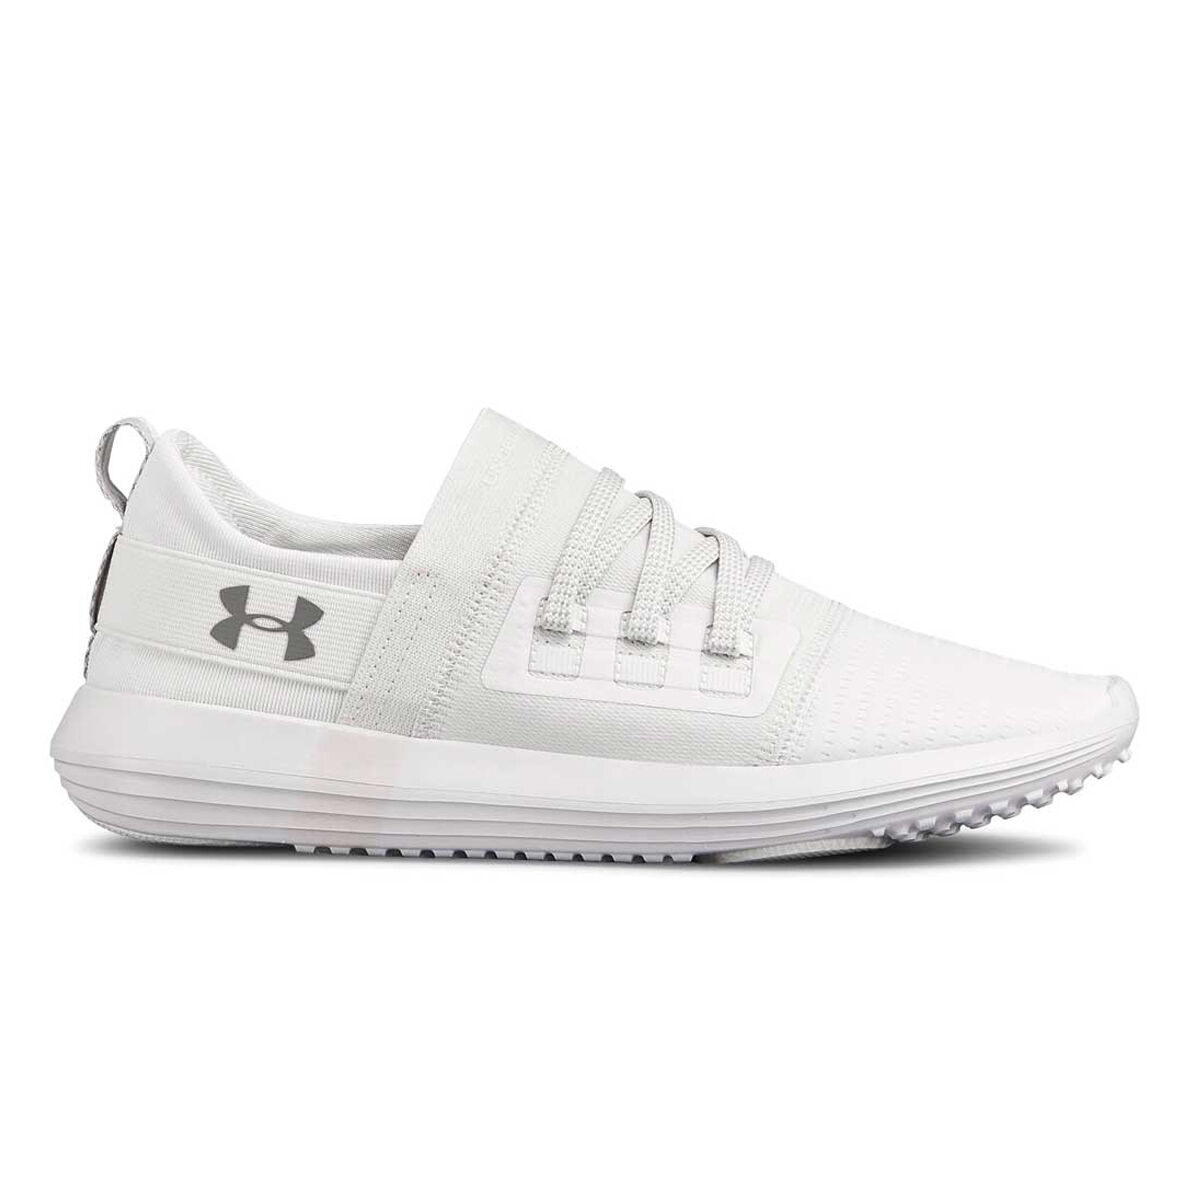 white under armour shoes for women